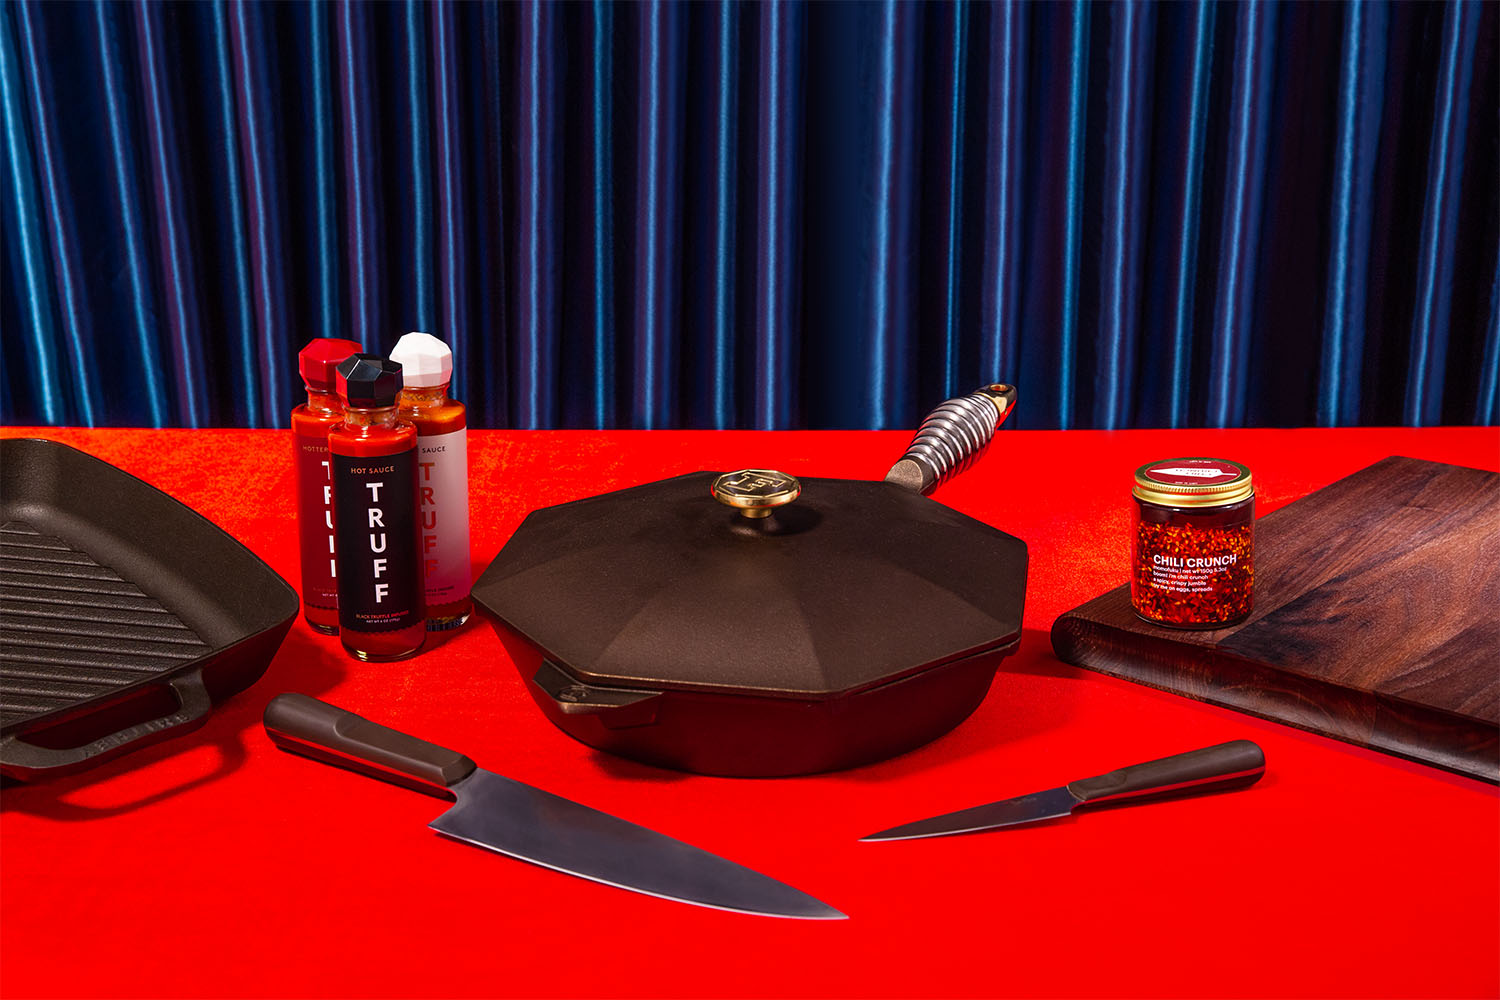 truff hot sauces, chili crisp, cast iron cookware and a knife and cutting board set